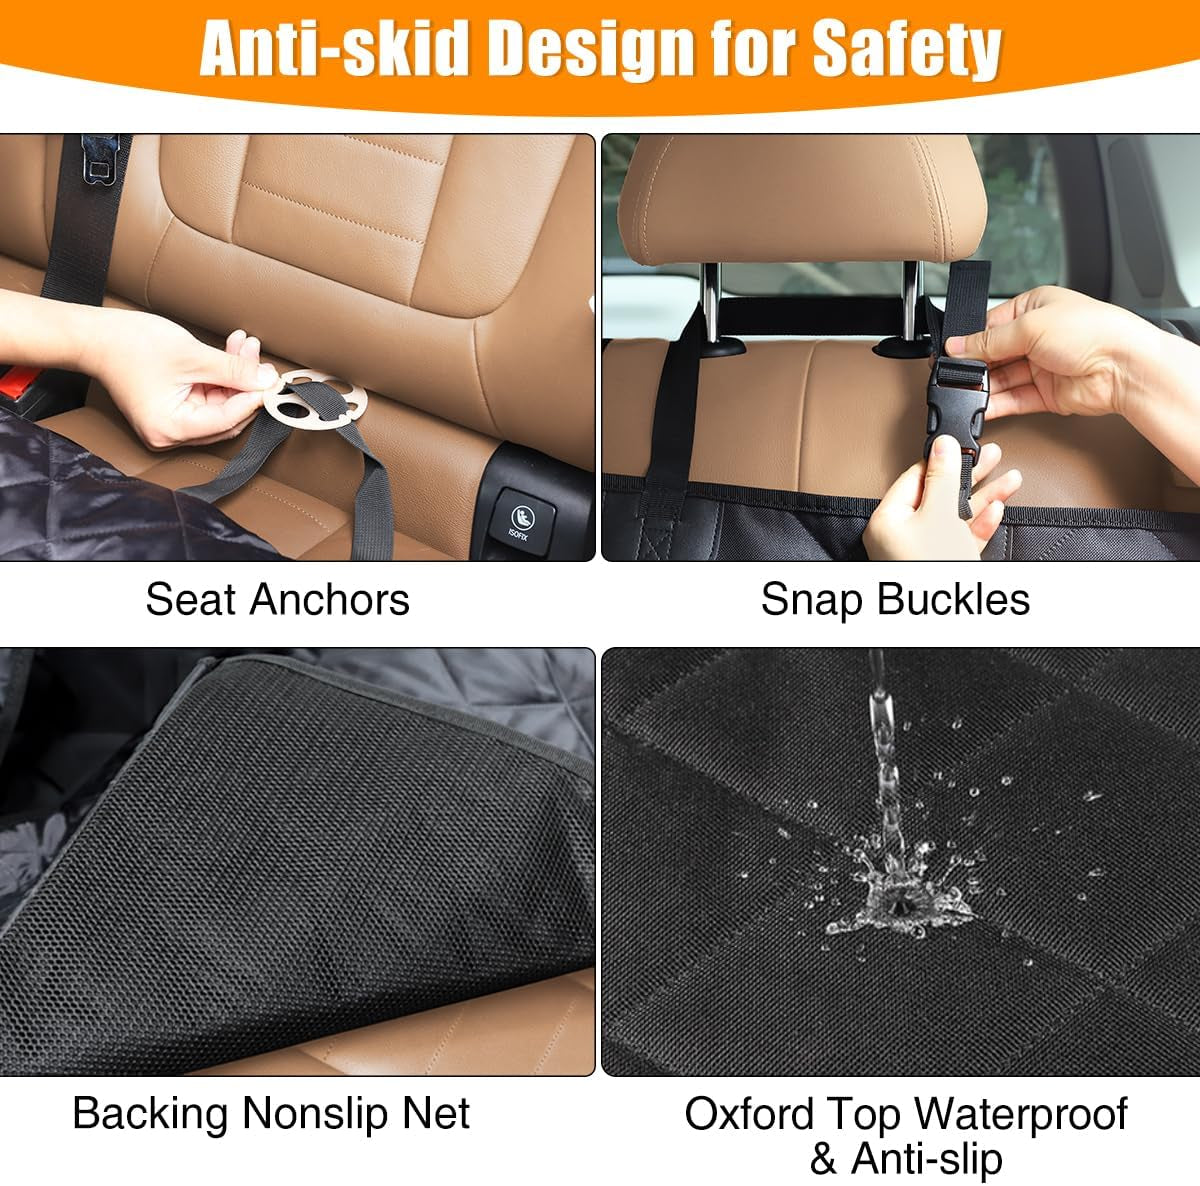 "Ultimate Waterproof Dog Car Seat Cover: Protect Your Car and Pamper Your Pooch in Style!"